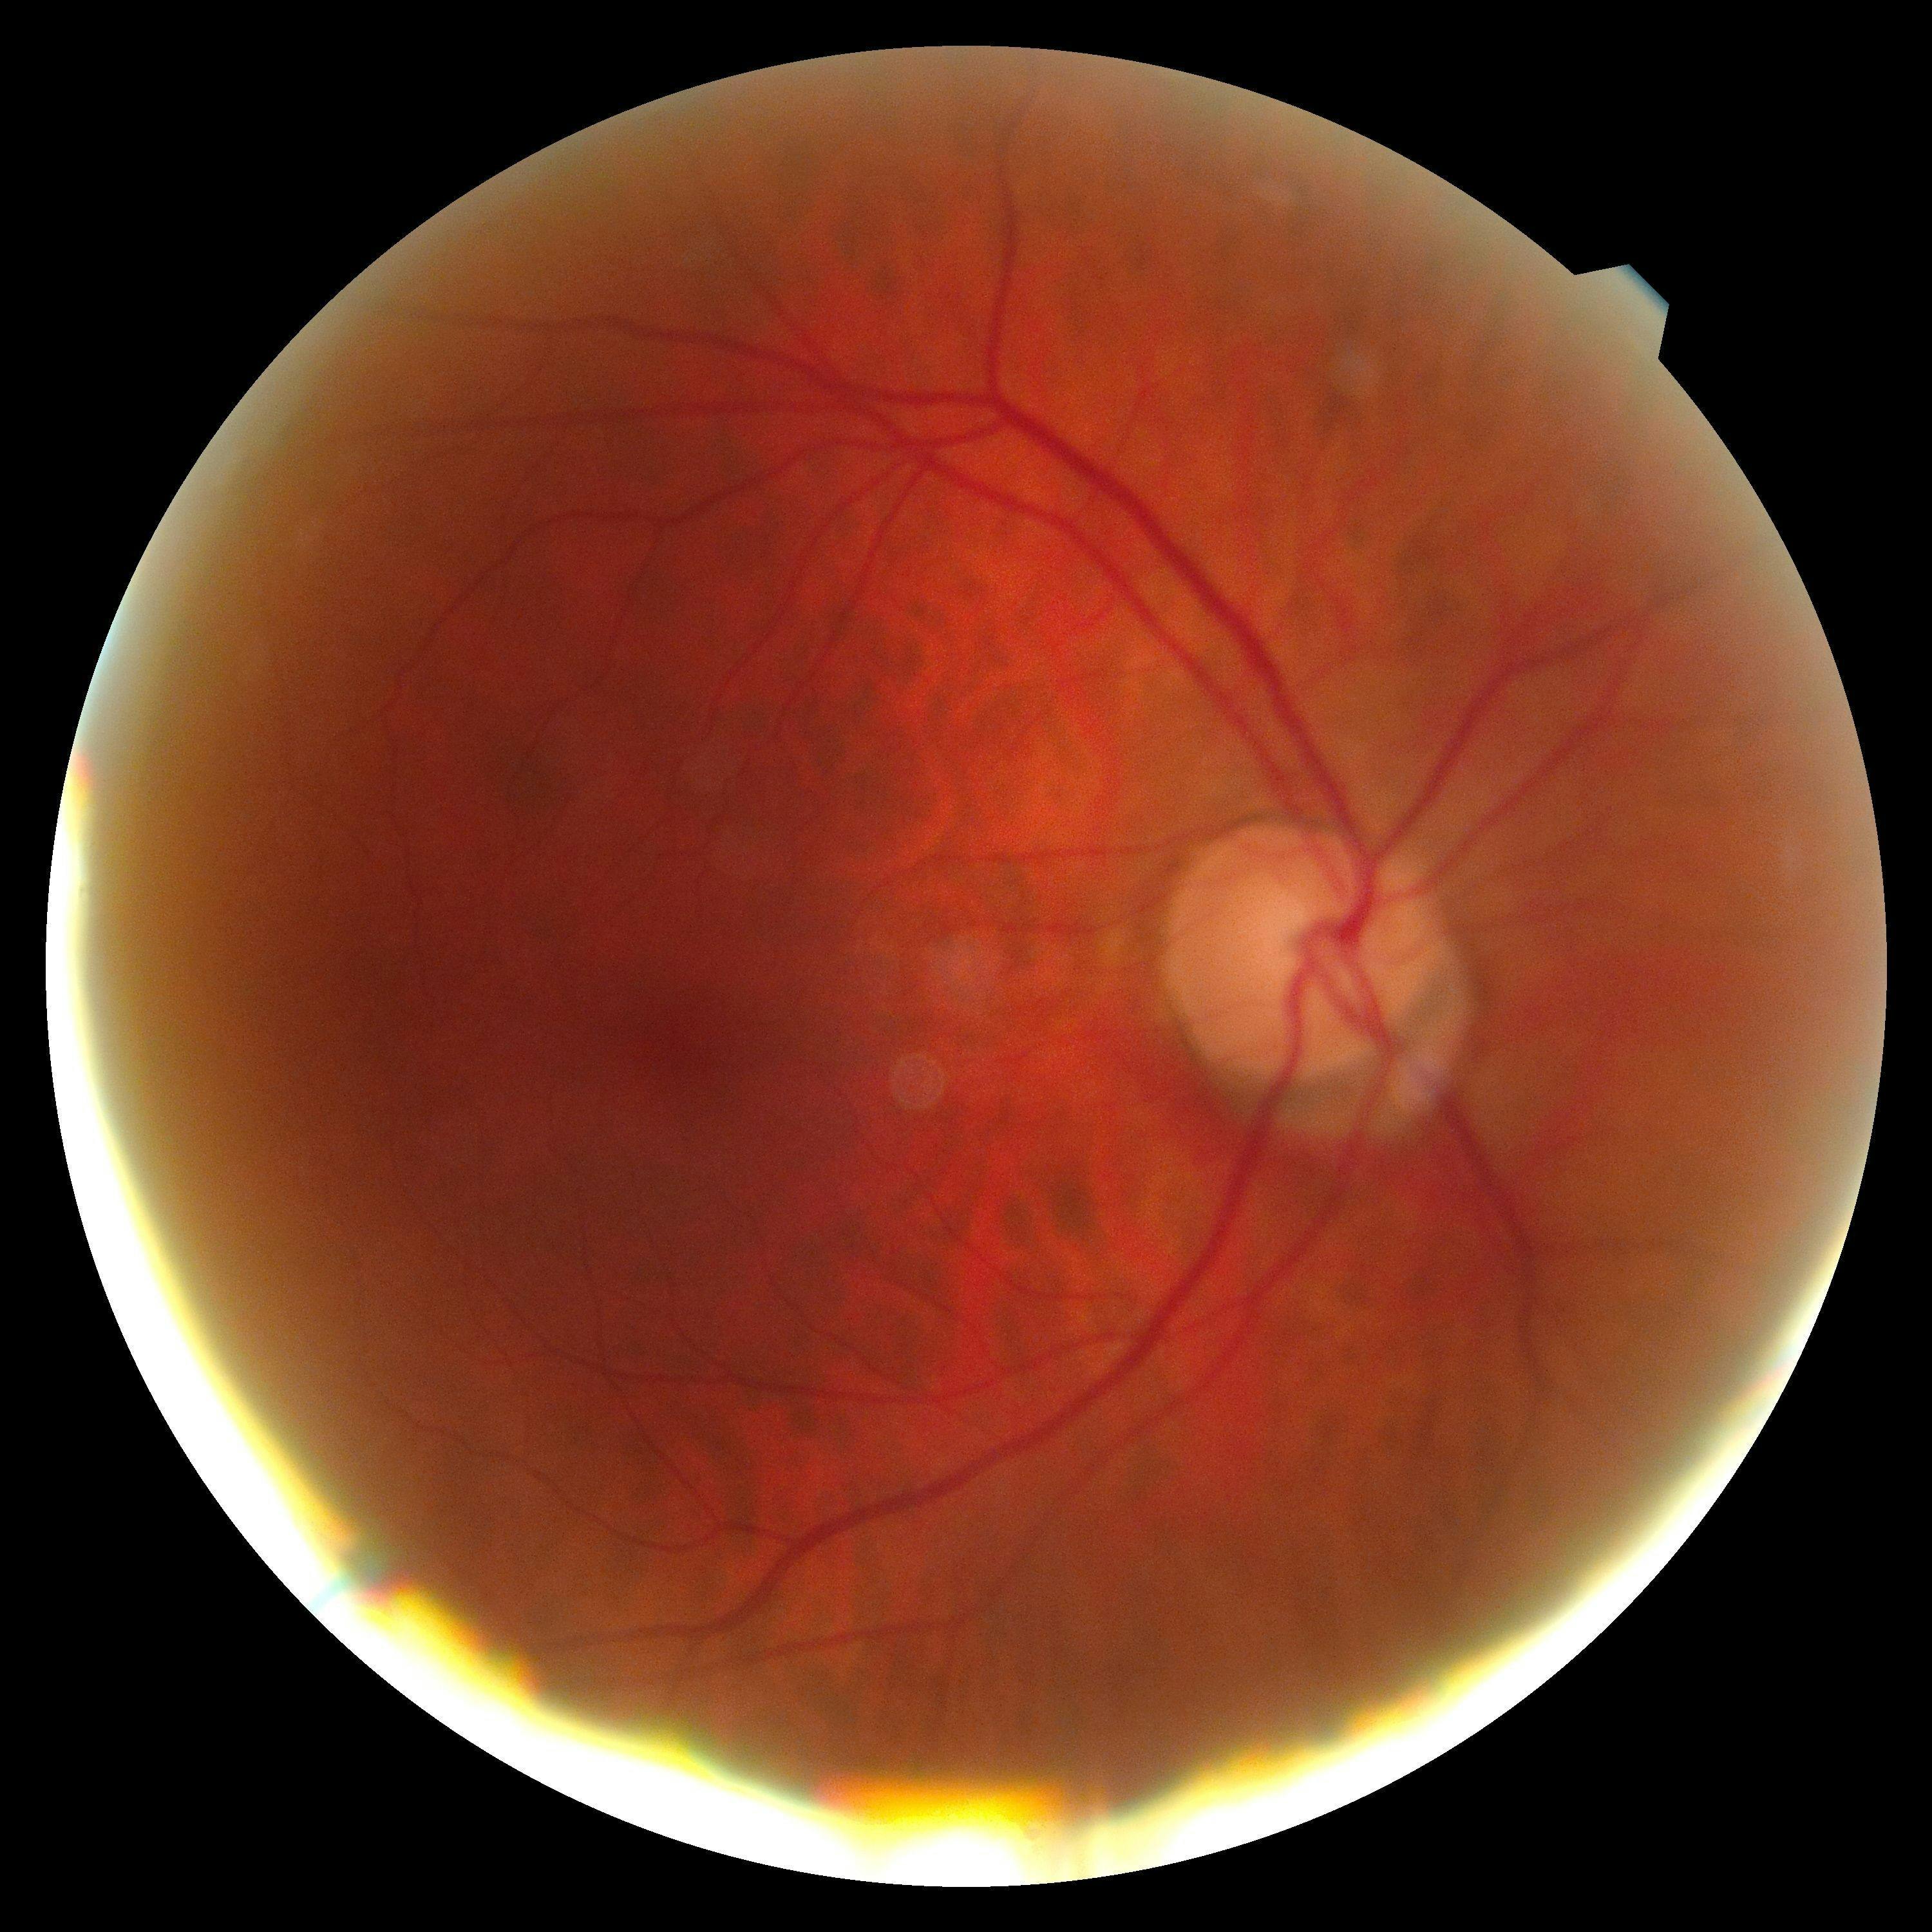 OD fundus initial NAION